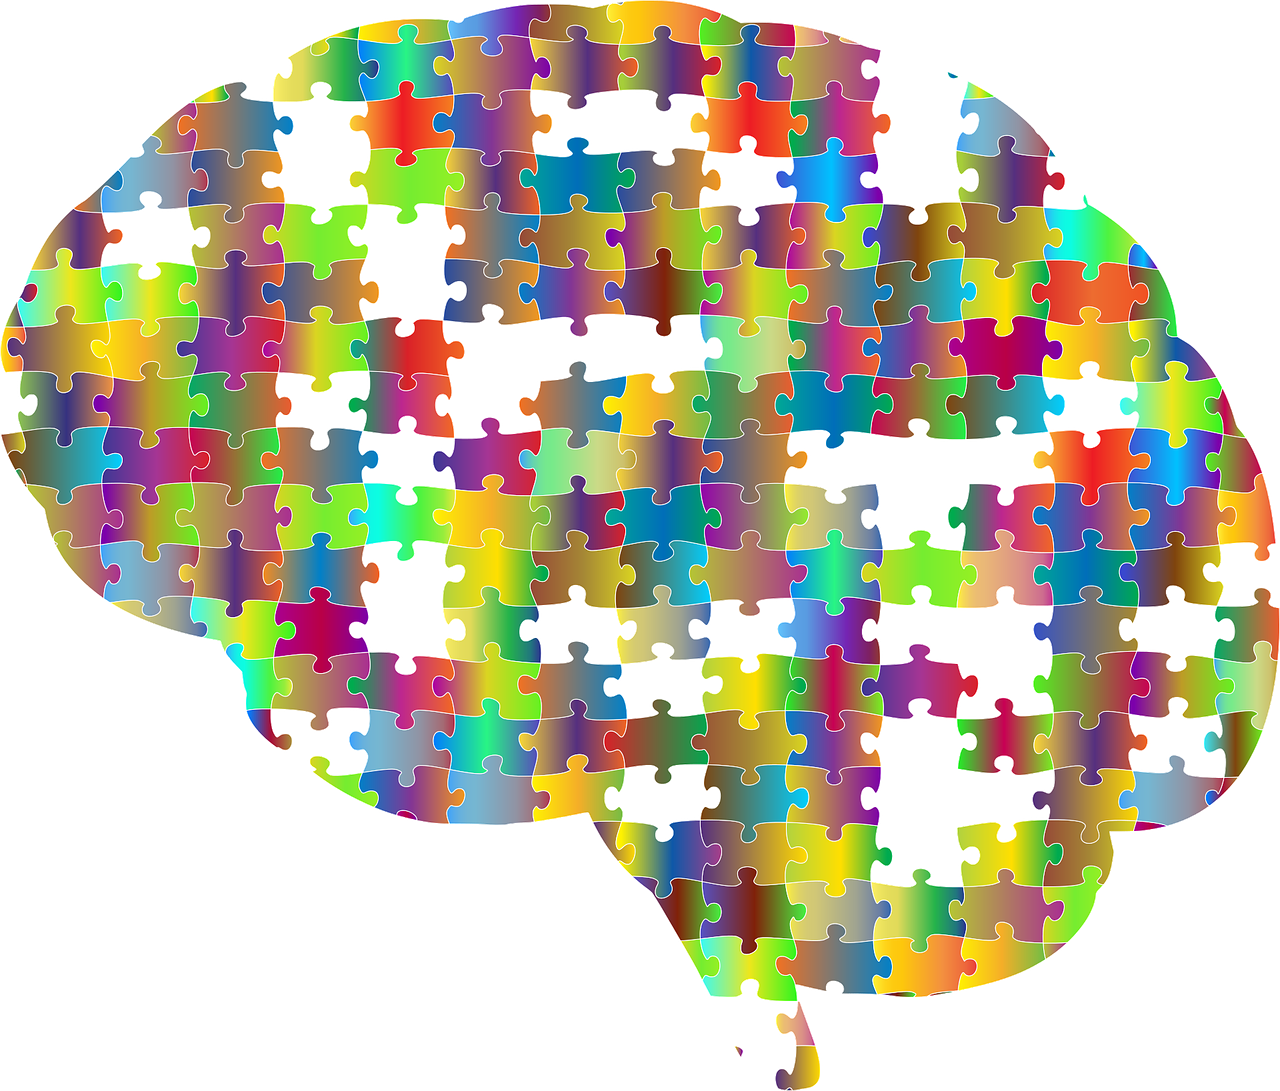 an image of a brain made of jigsaw pieces